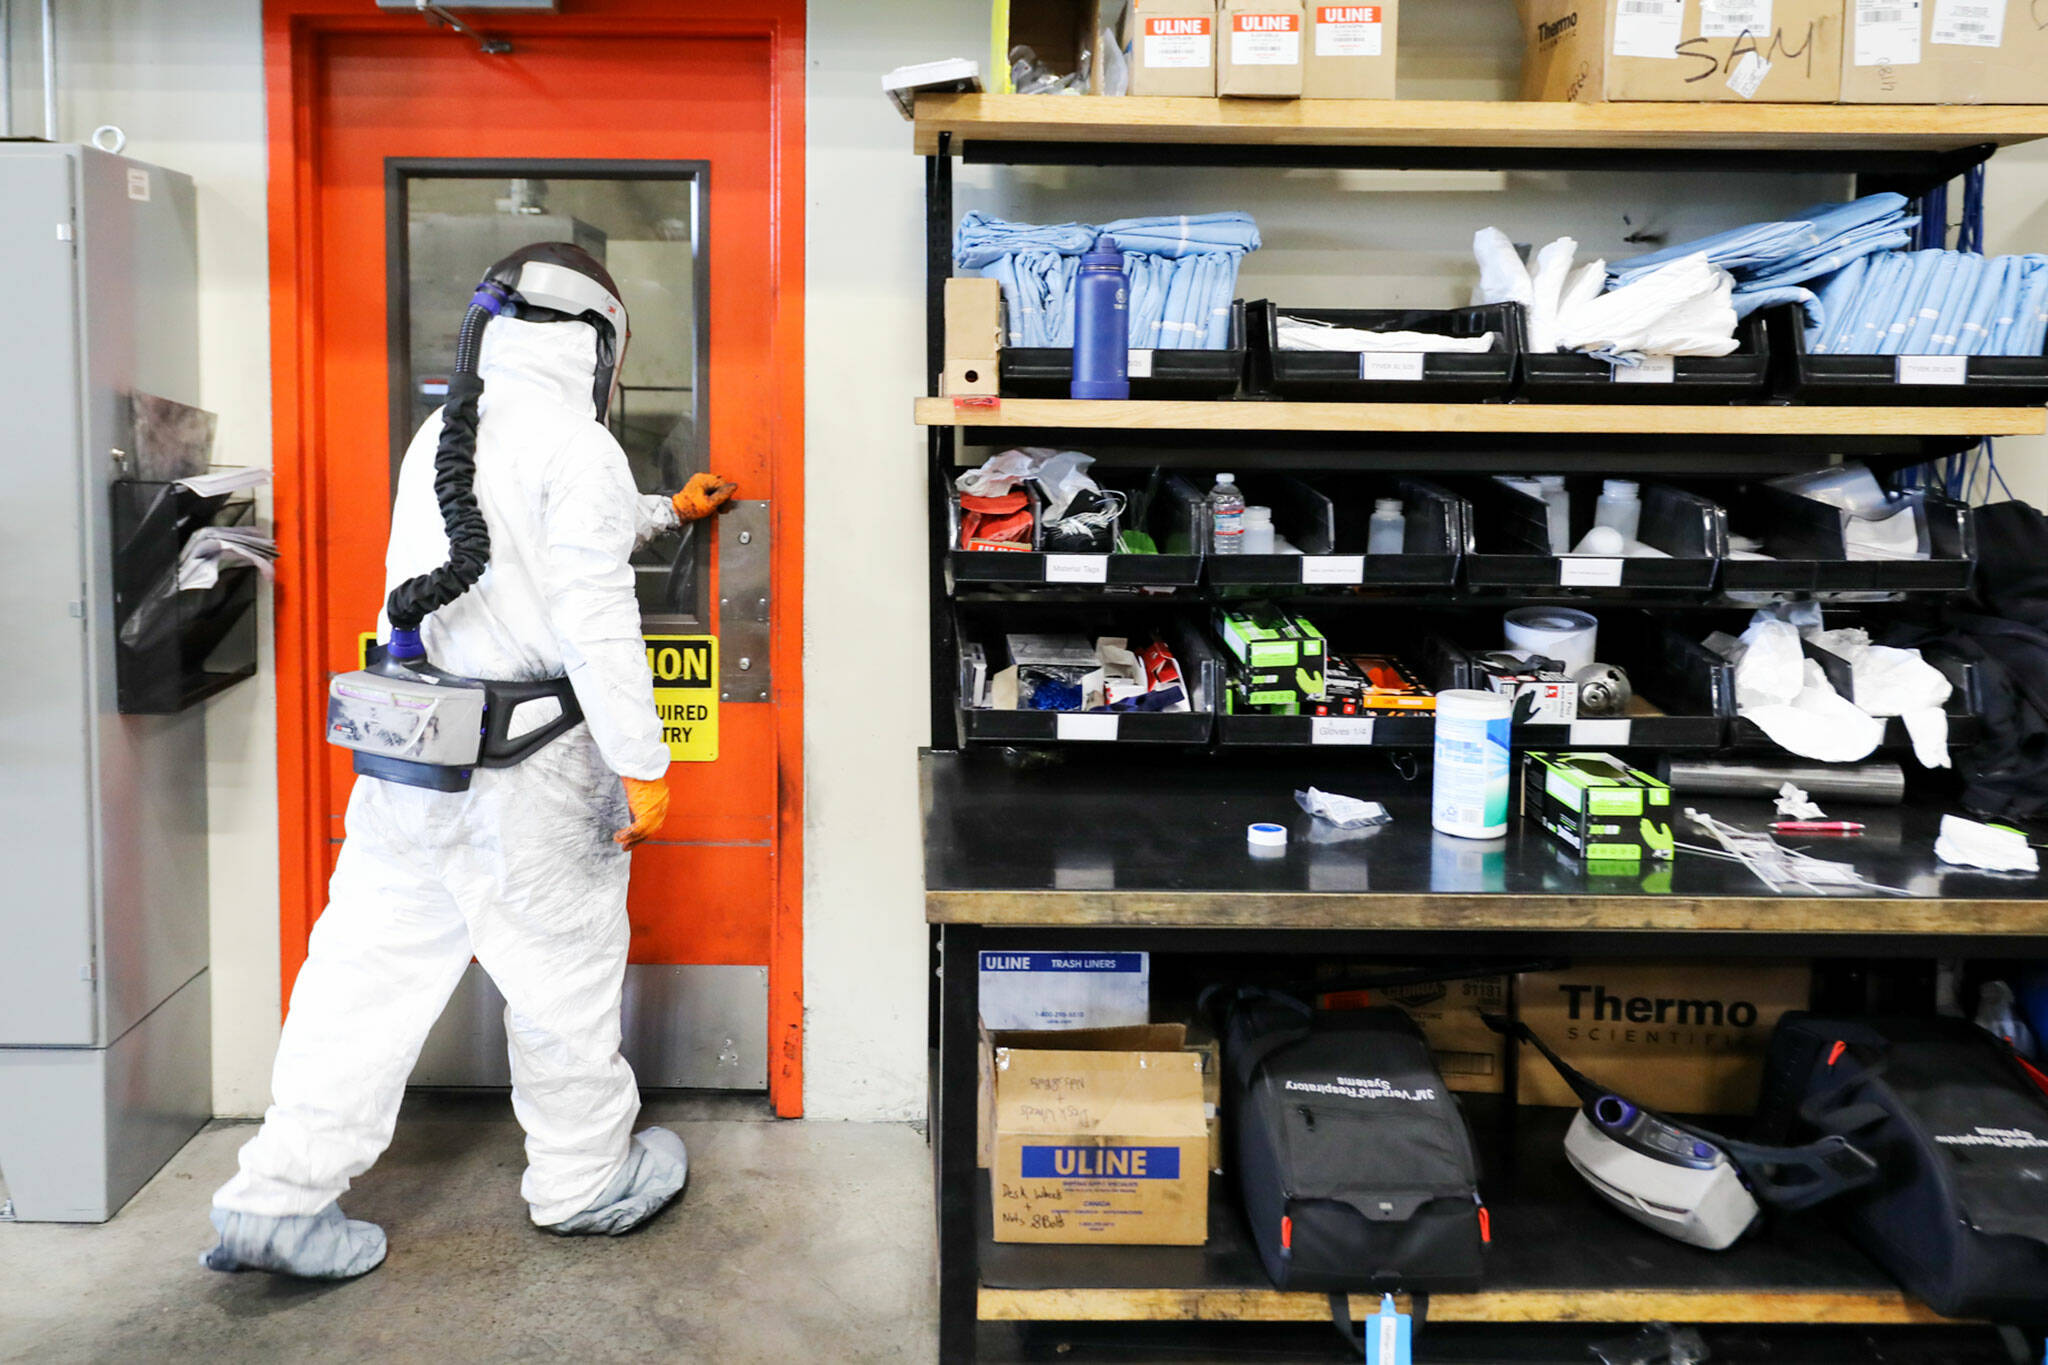 Personal protection equipment — affectionately called “space suits” — is required to enter the milling room at Group14 Technologies in Woodinville. (Kevin Clark / The Herald)